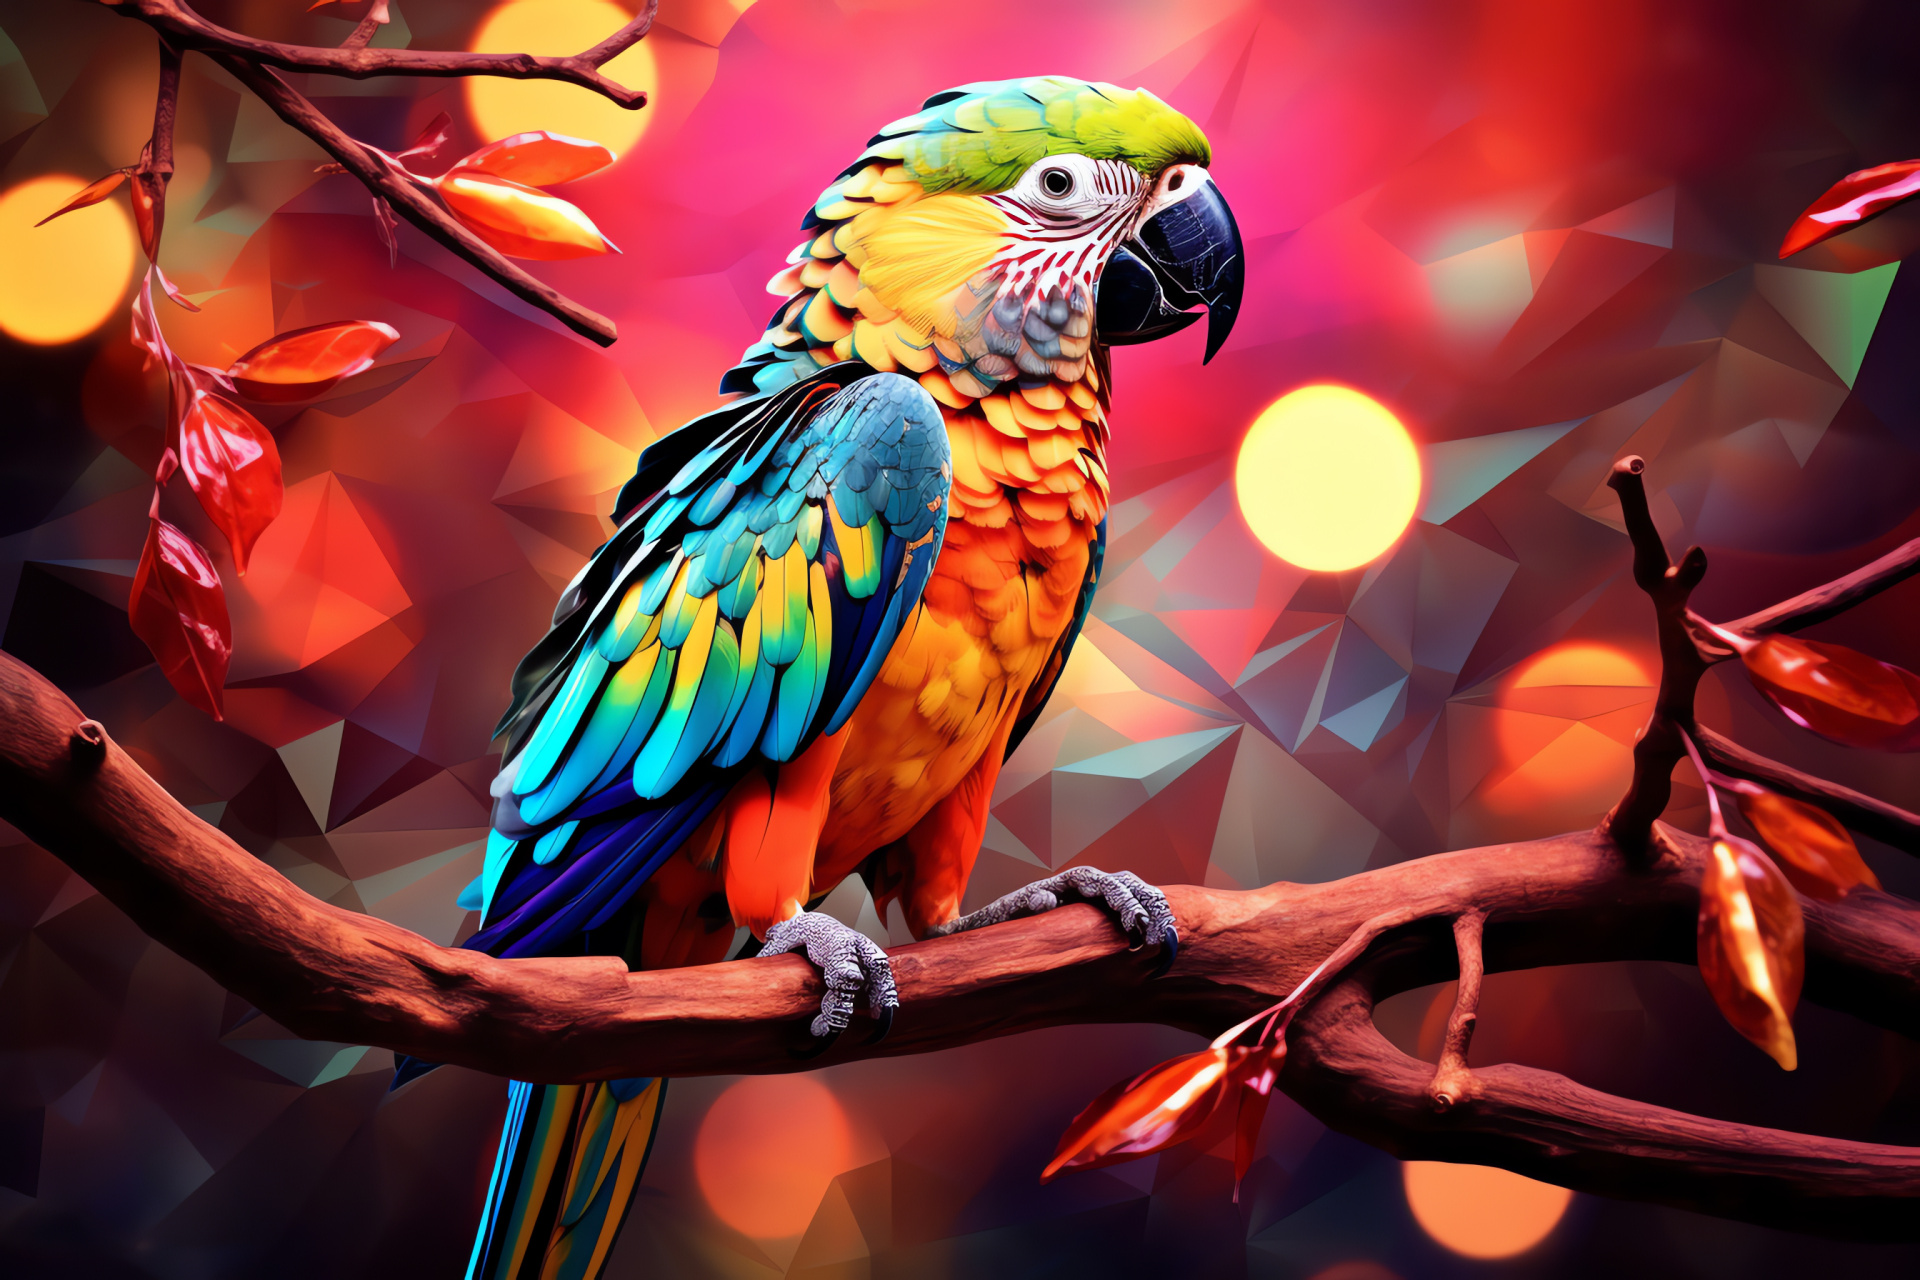 Macaw, brilliant feathers, timber perch, intricate patterns, artistic setting, HD Desktop Image